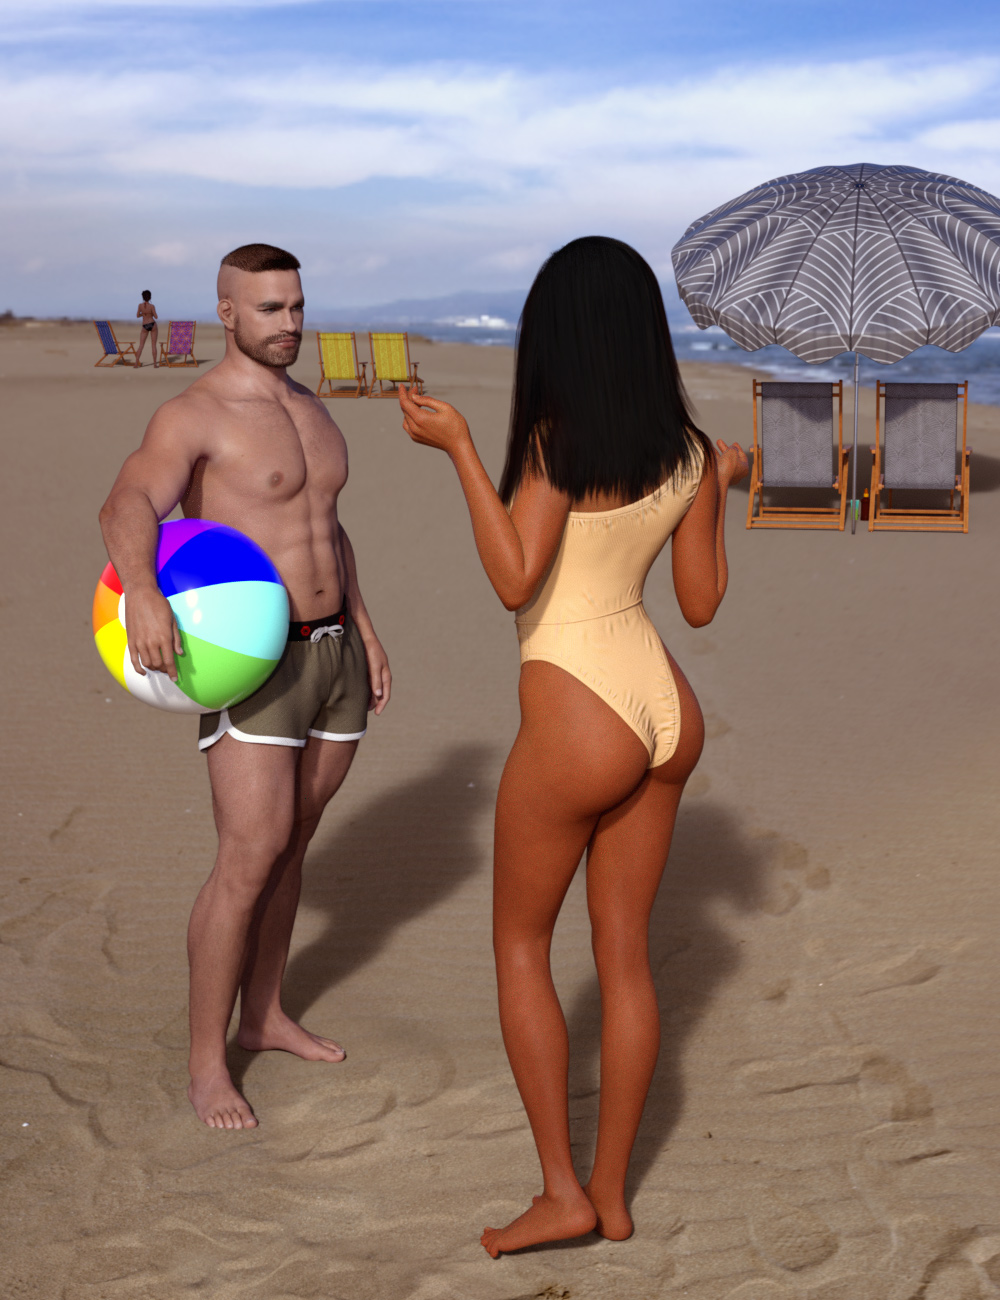 Beach Party Props by: ARTCollab, 3D Models by Daz 3D